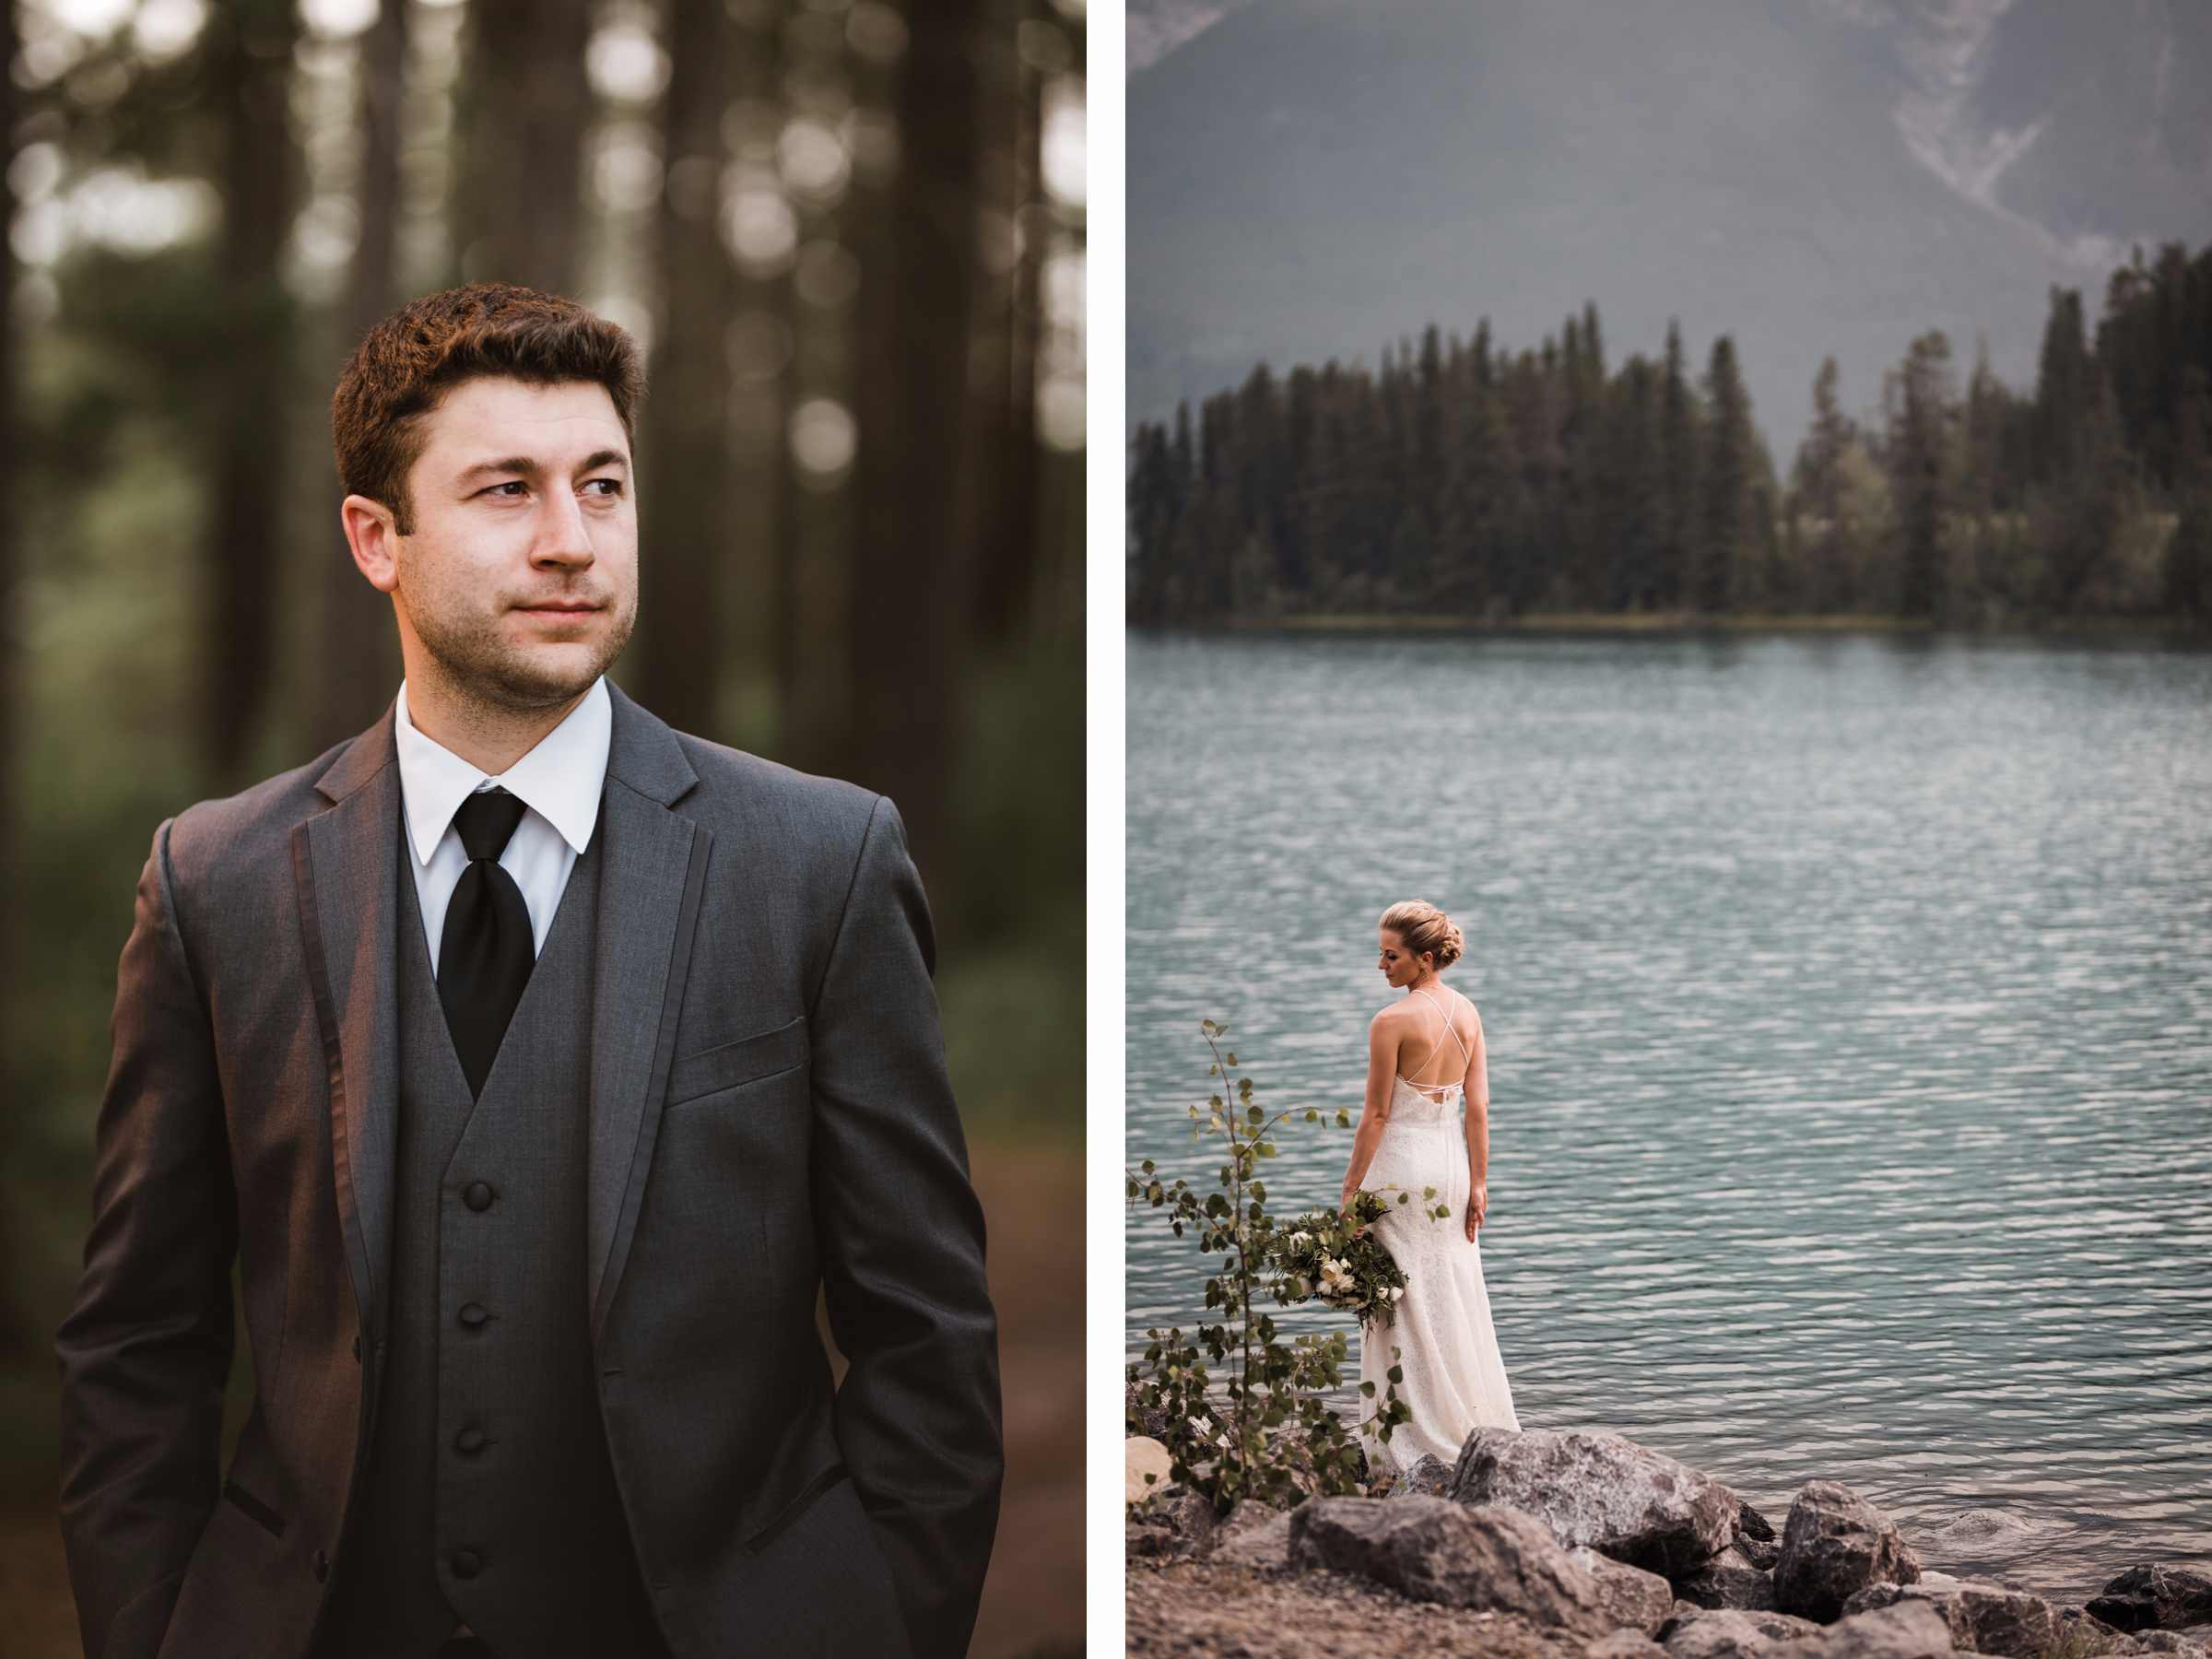 Calgary wedding photographer at Canmore and Banff destination elopement wedding in rocky mountains, Alberta, Canada - Photo 28